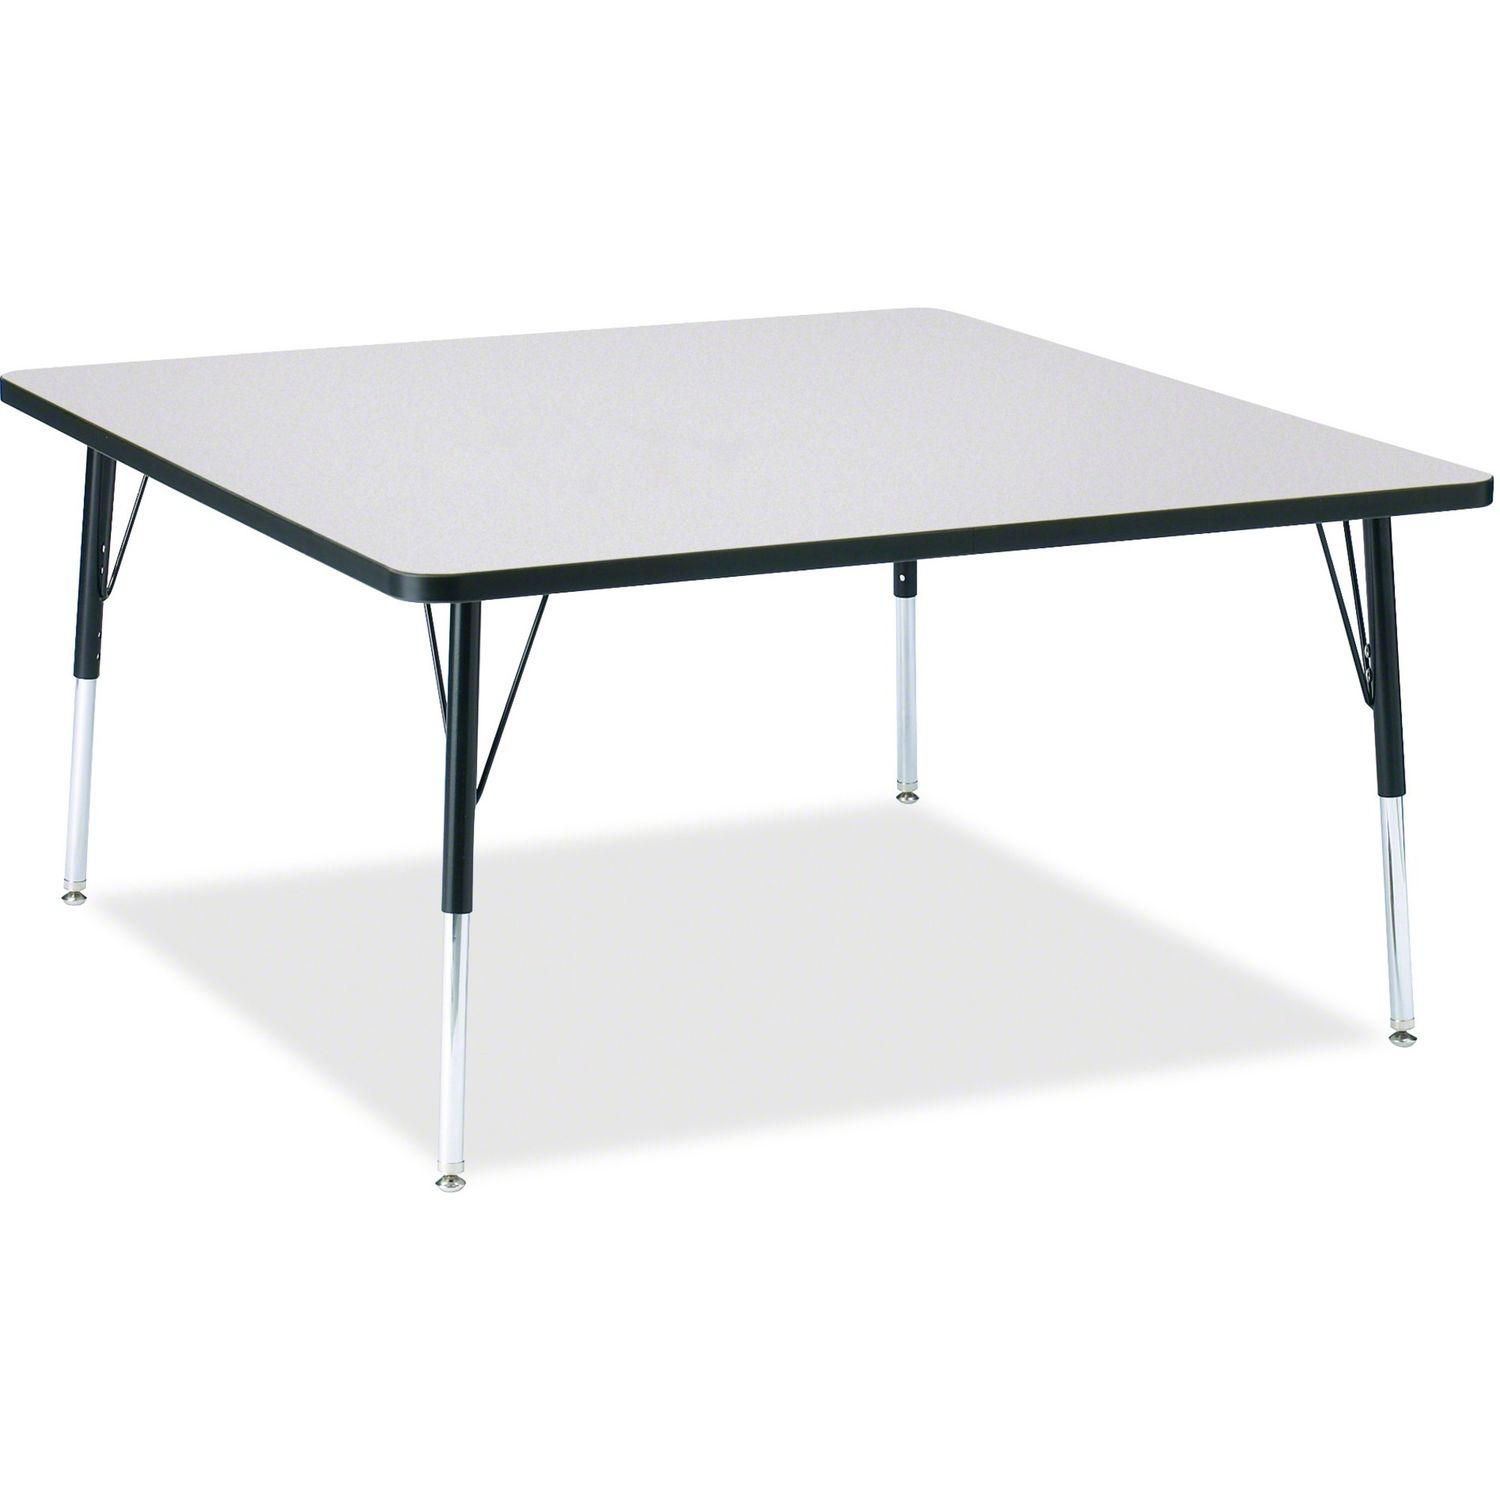 Berries Adult Height Prism Color Edge Square Table Black Square, Laminated Top, Four Leg Base, 4 Legs, 48" Table Top Length x 48" Table Top Width x 1.13" Table Top Thickness, 31" Height